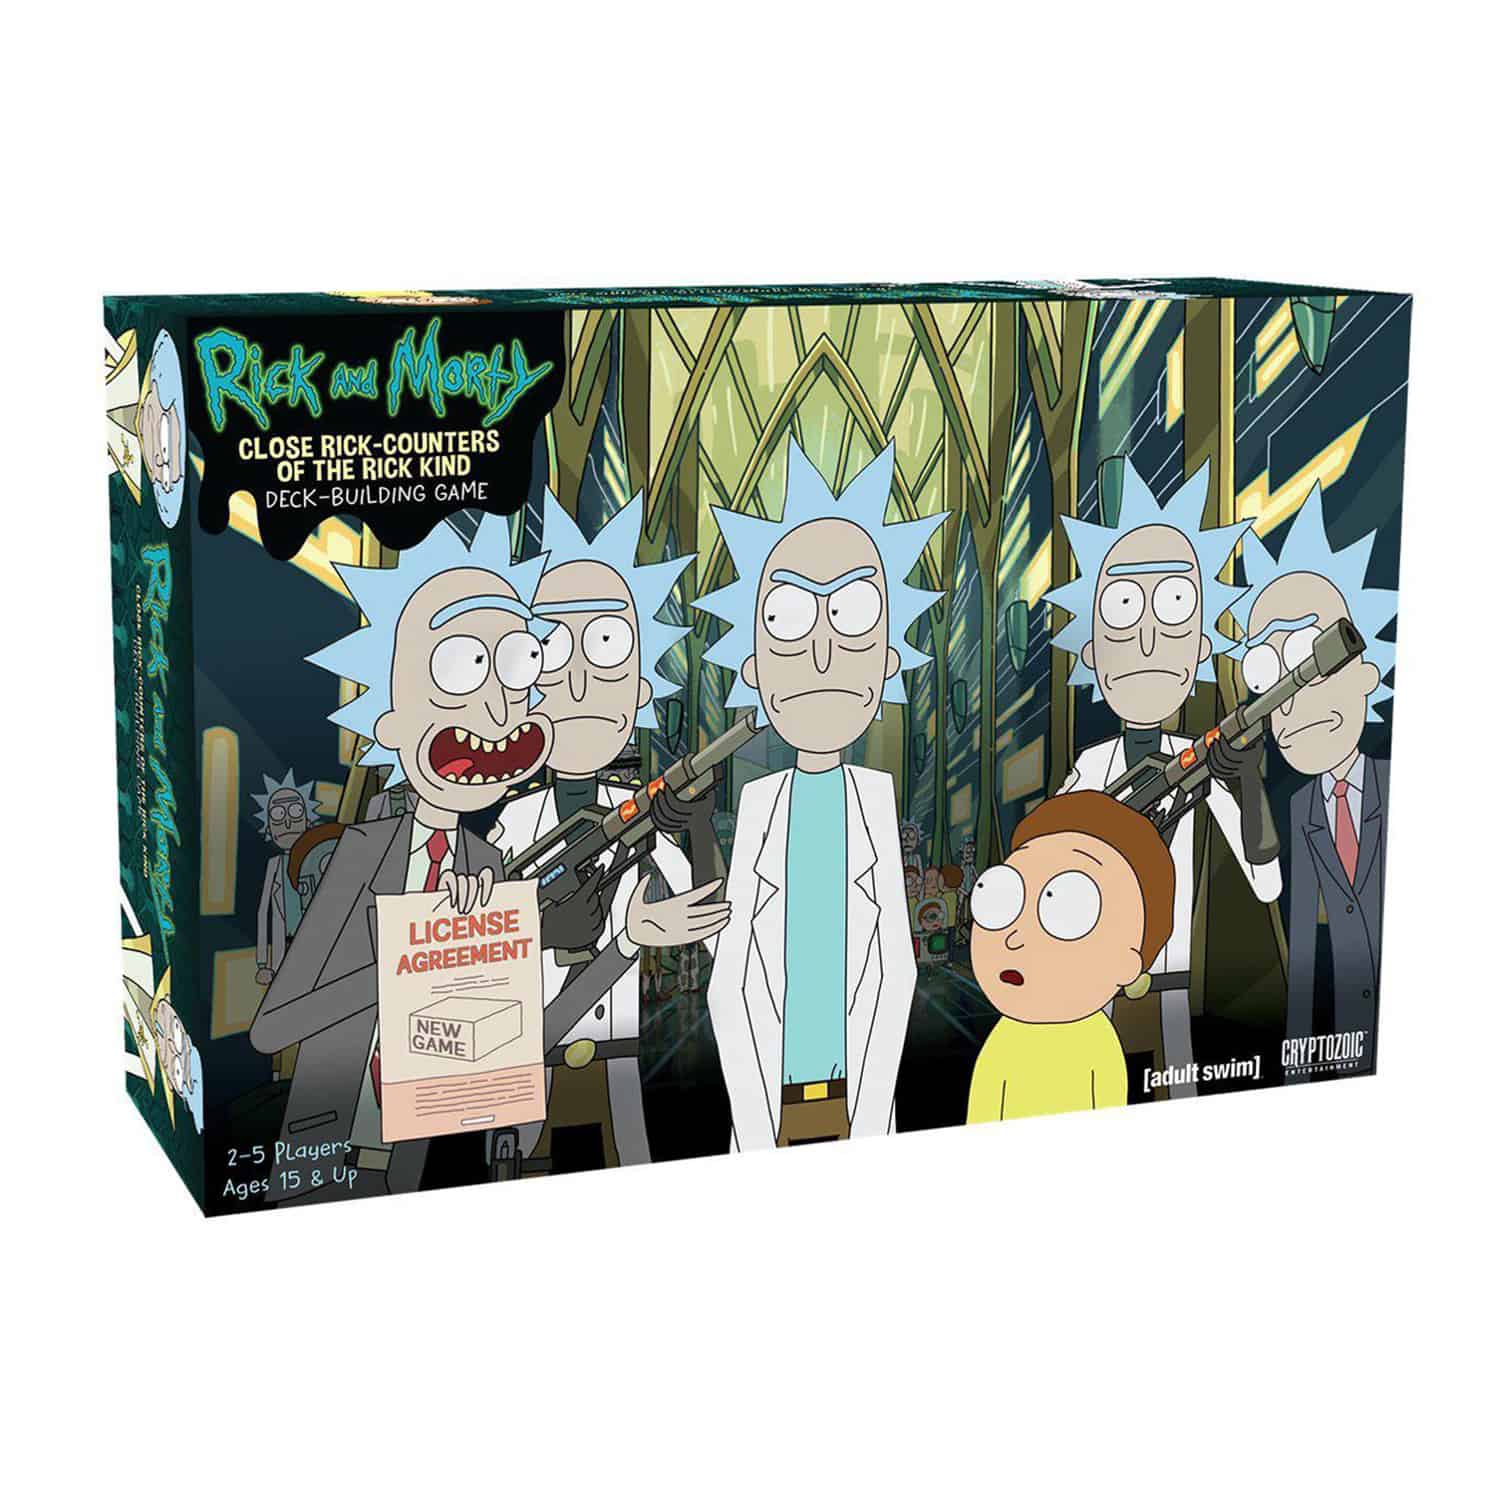 Rick and Morty Deck-Building Game Close Rick-Counters of the Rick Kind *English Version* 12